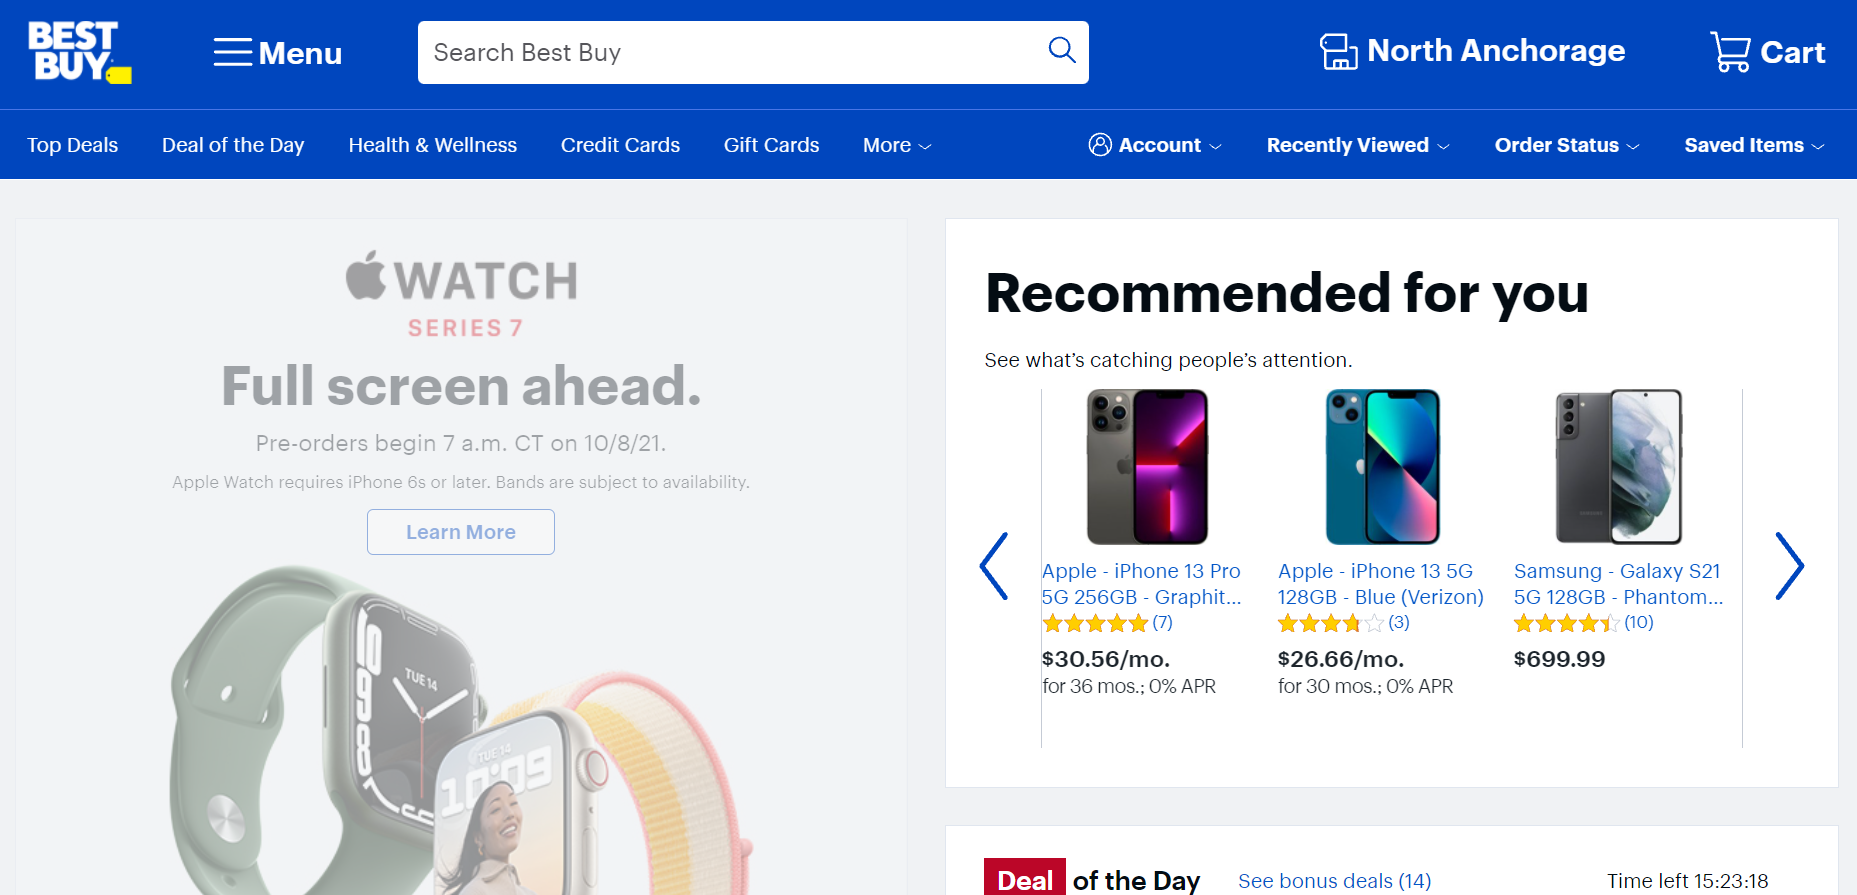 Best Buy is one of Amazon's main competitors